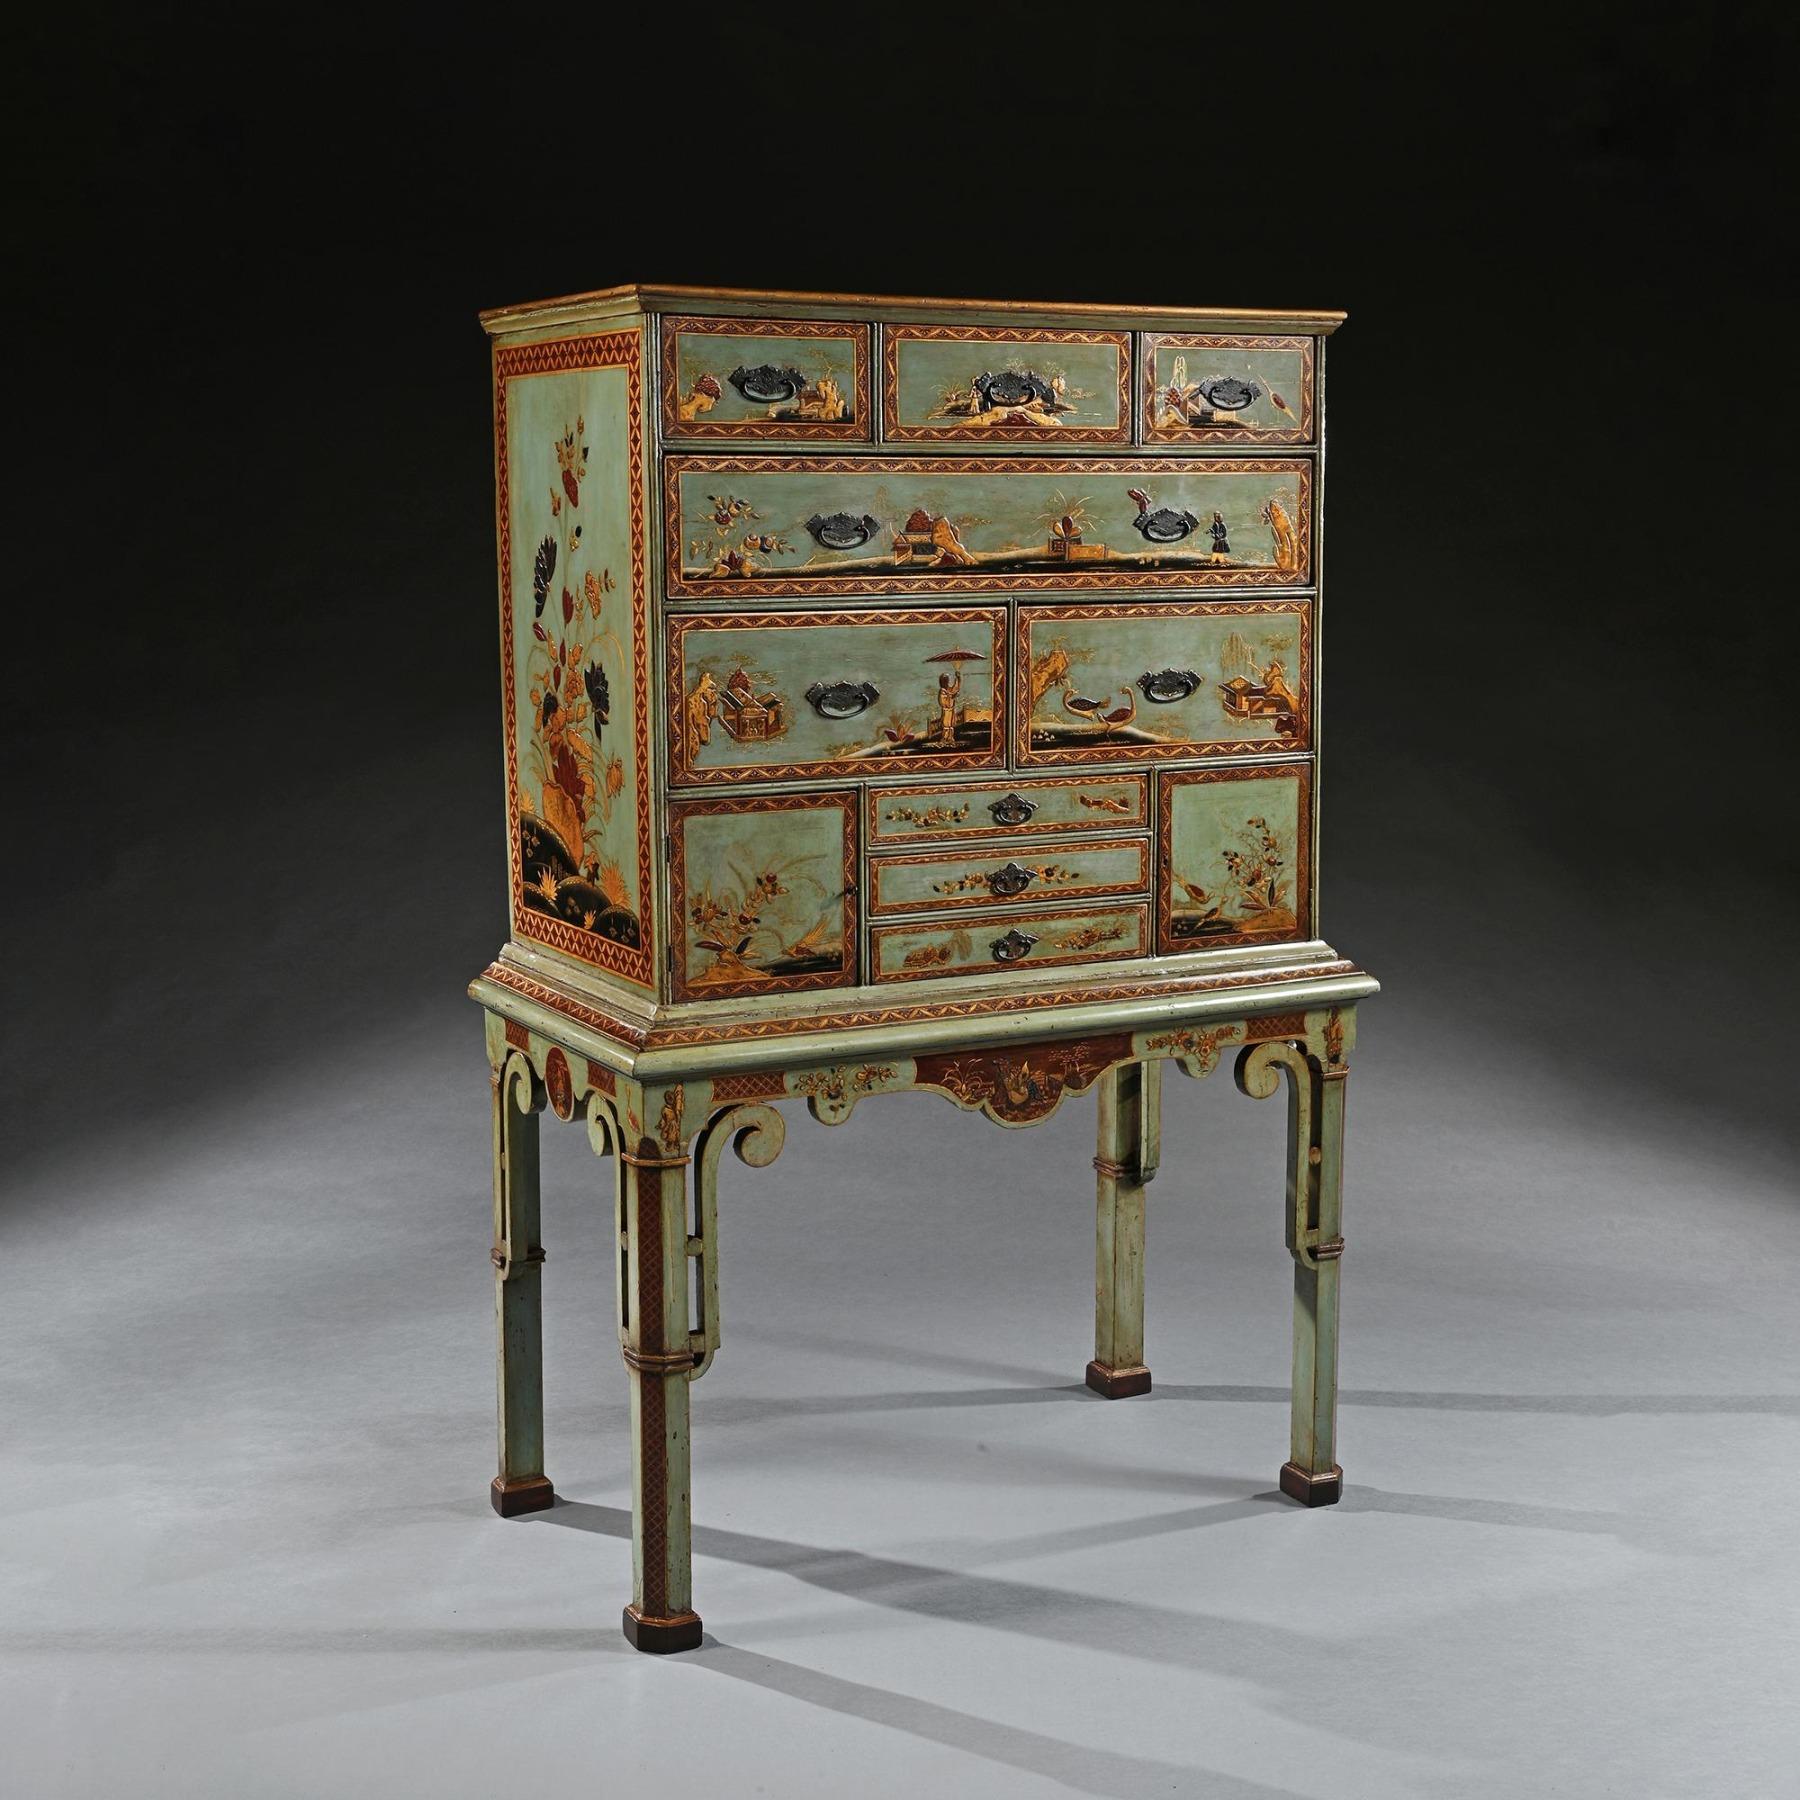 A Superb and Rare 18th Century European Japanned Chinoiserie Chest on Stand with important provenance.

English Circa 1780
 
Provenance
 
Villa Guaita, Cadenabbia, Lombardy (Italy)
 
Sold by Galleria Pesaro of Milan in a house sale conducted on the